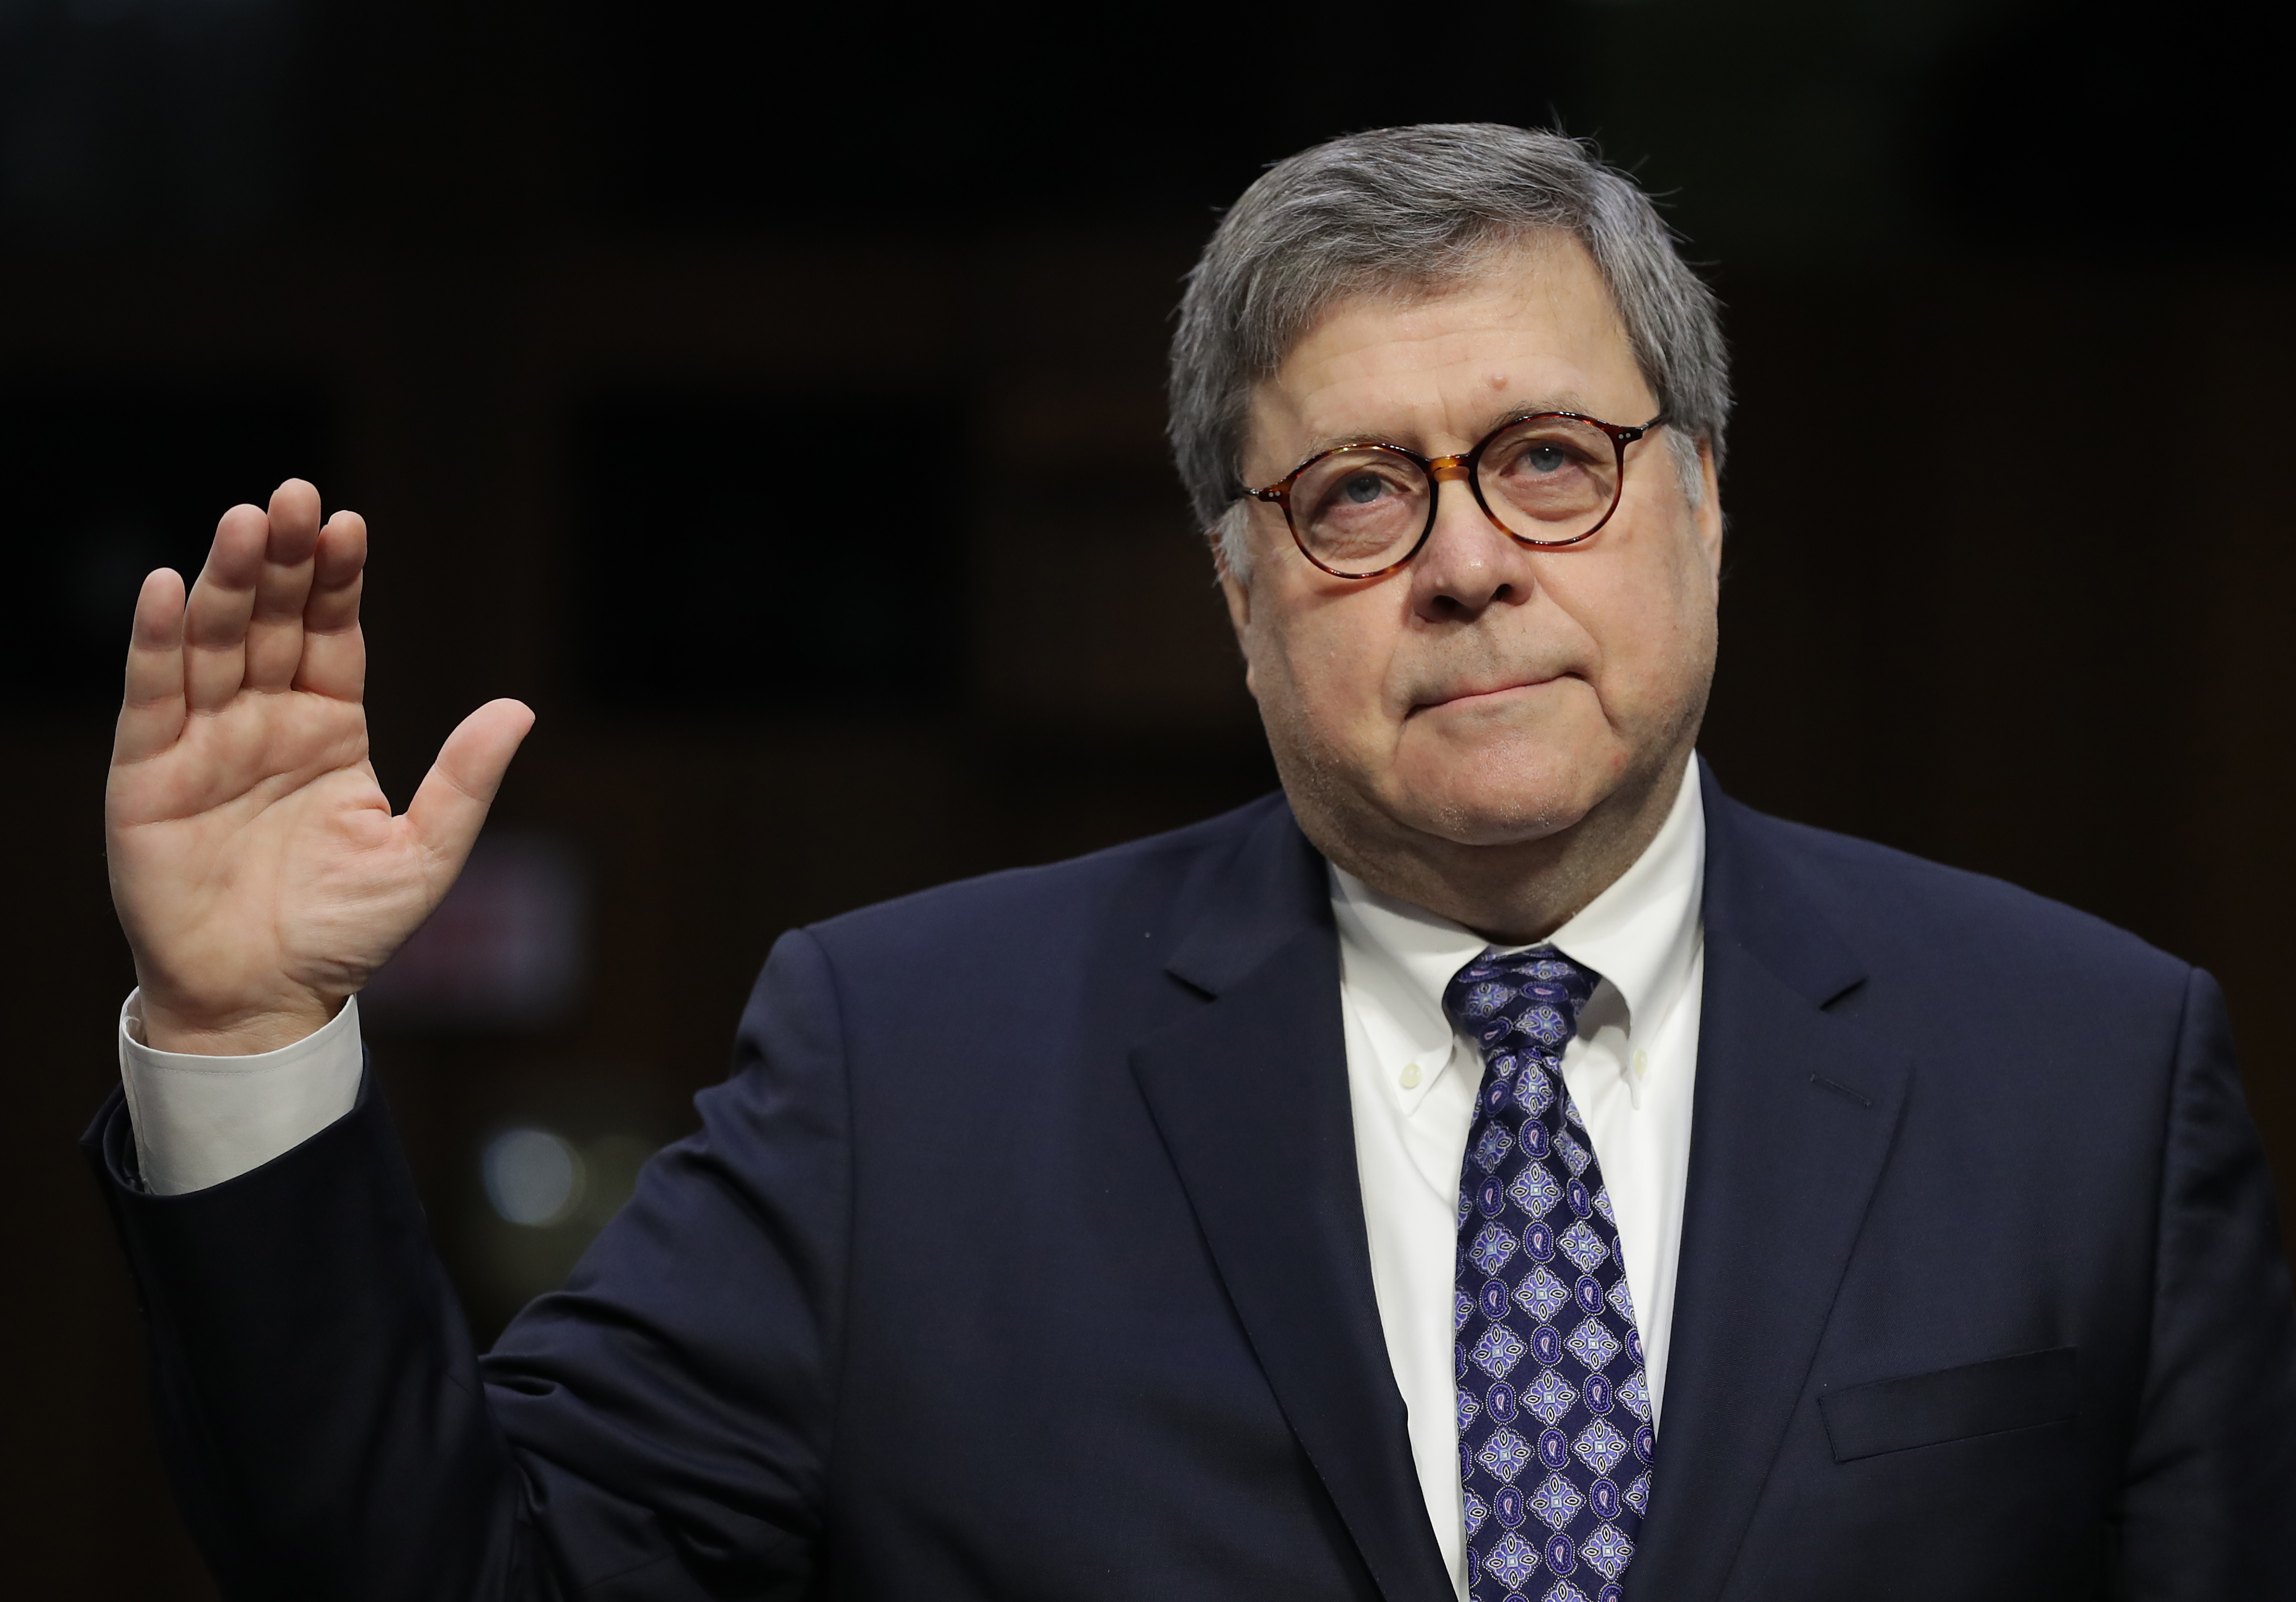 U.S. Attorney General nominee William Barr (C) is sworn in prior to testifying at his confirmation hearing before the Senate Judiciary Committee (Photo by Chip Somodevilla/Getty Images)